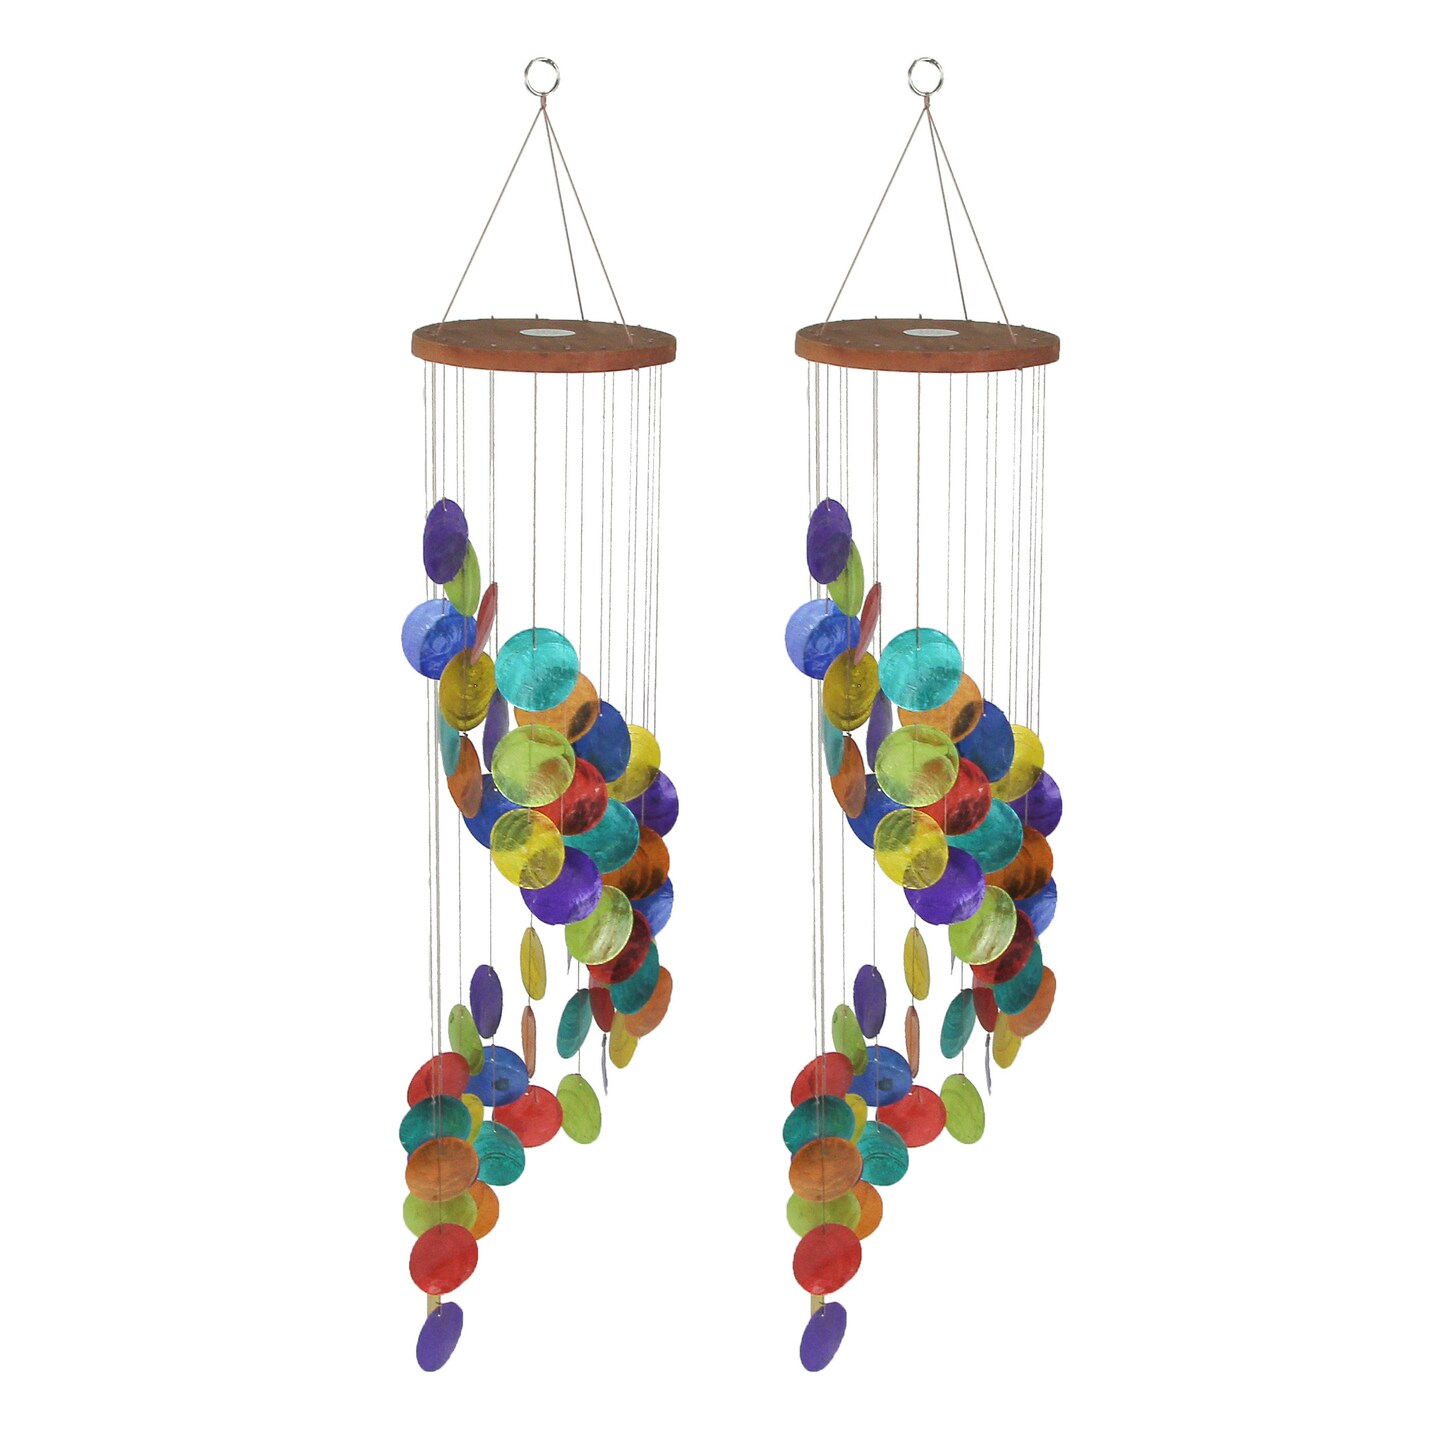 Set of 2 Dyed Capiz Shell 26 Inch Long Spiral Wind Chimes Rainbow Colors